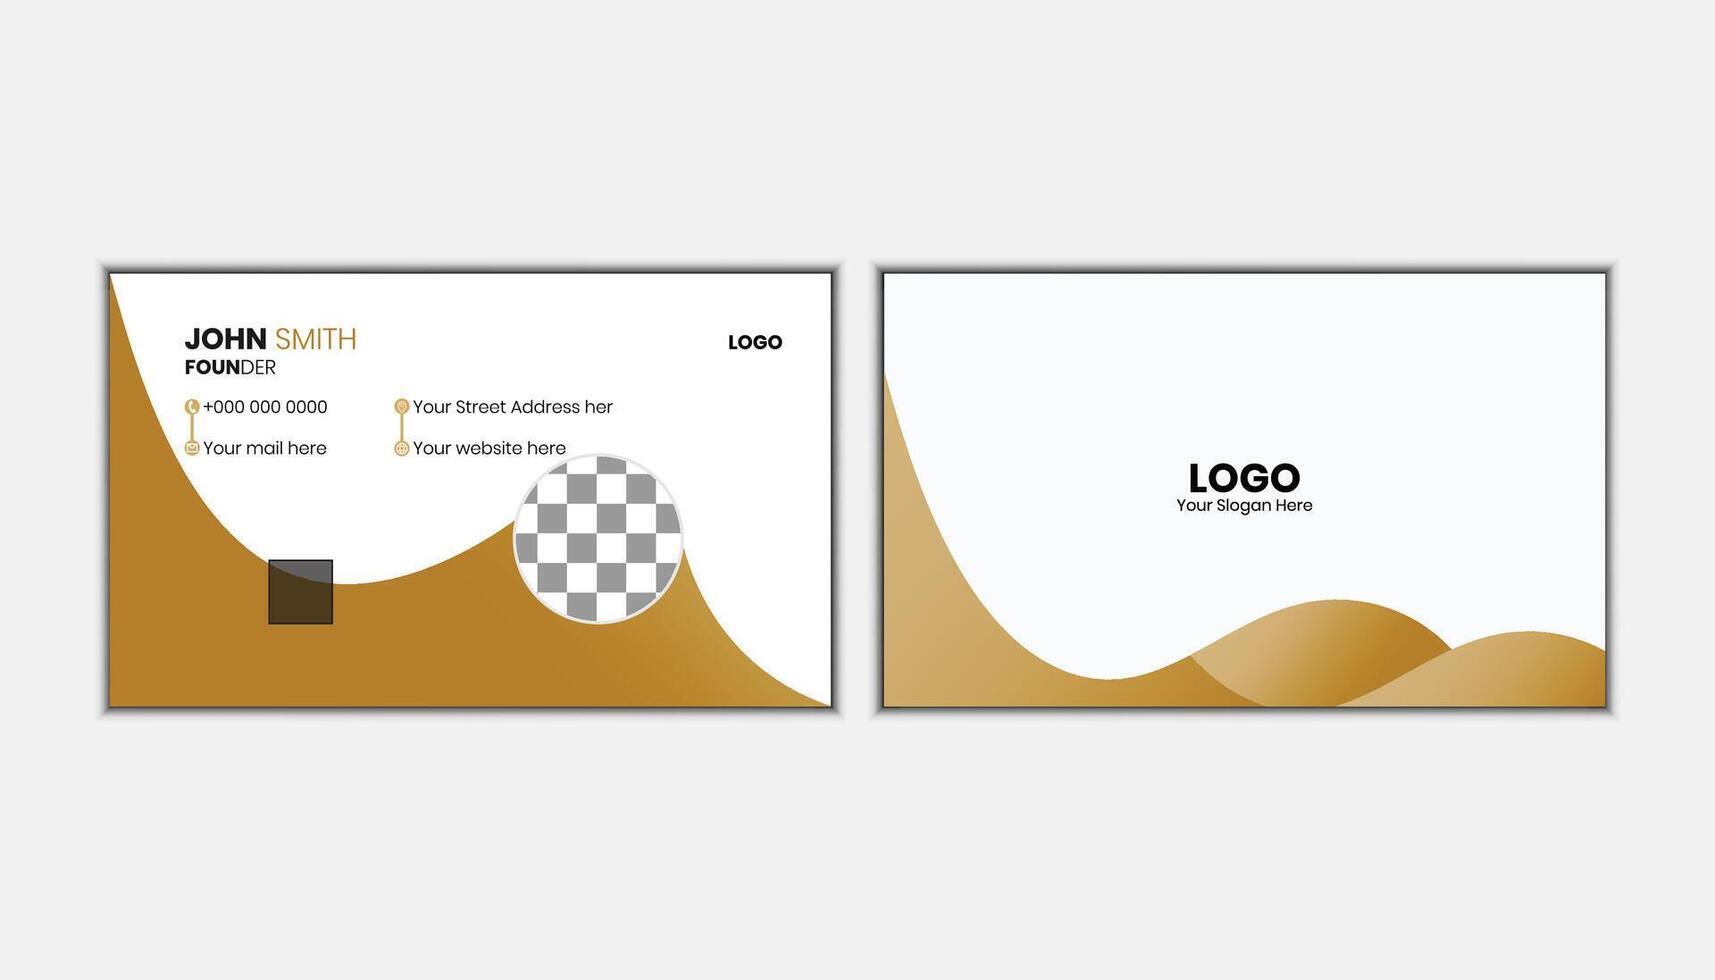 Business Card Template Collection free Vector. vector